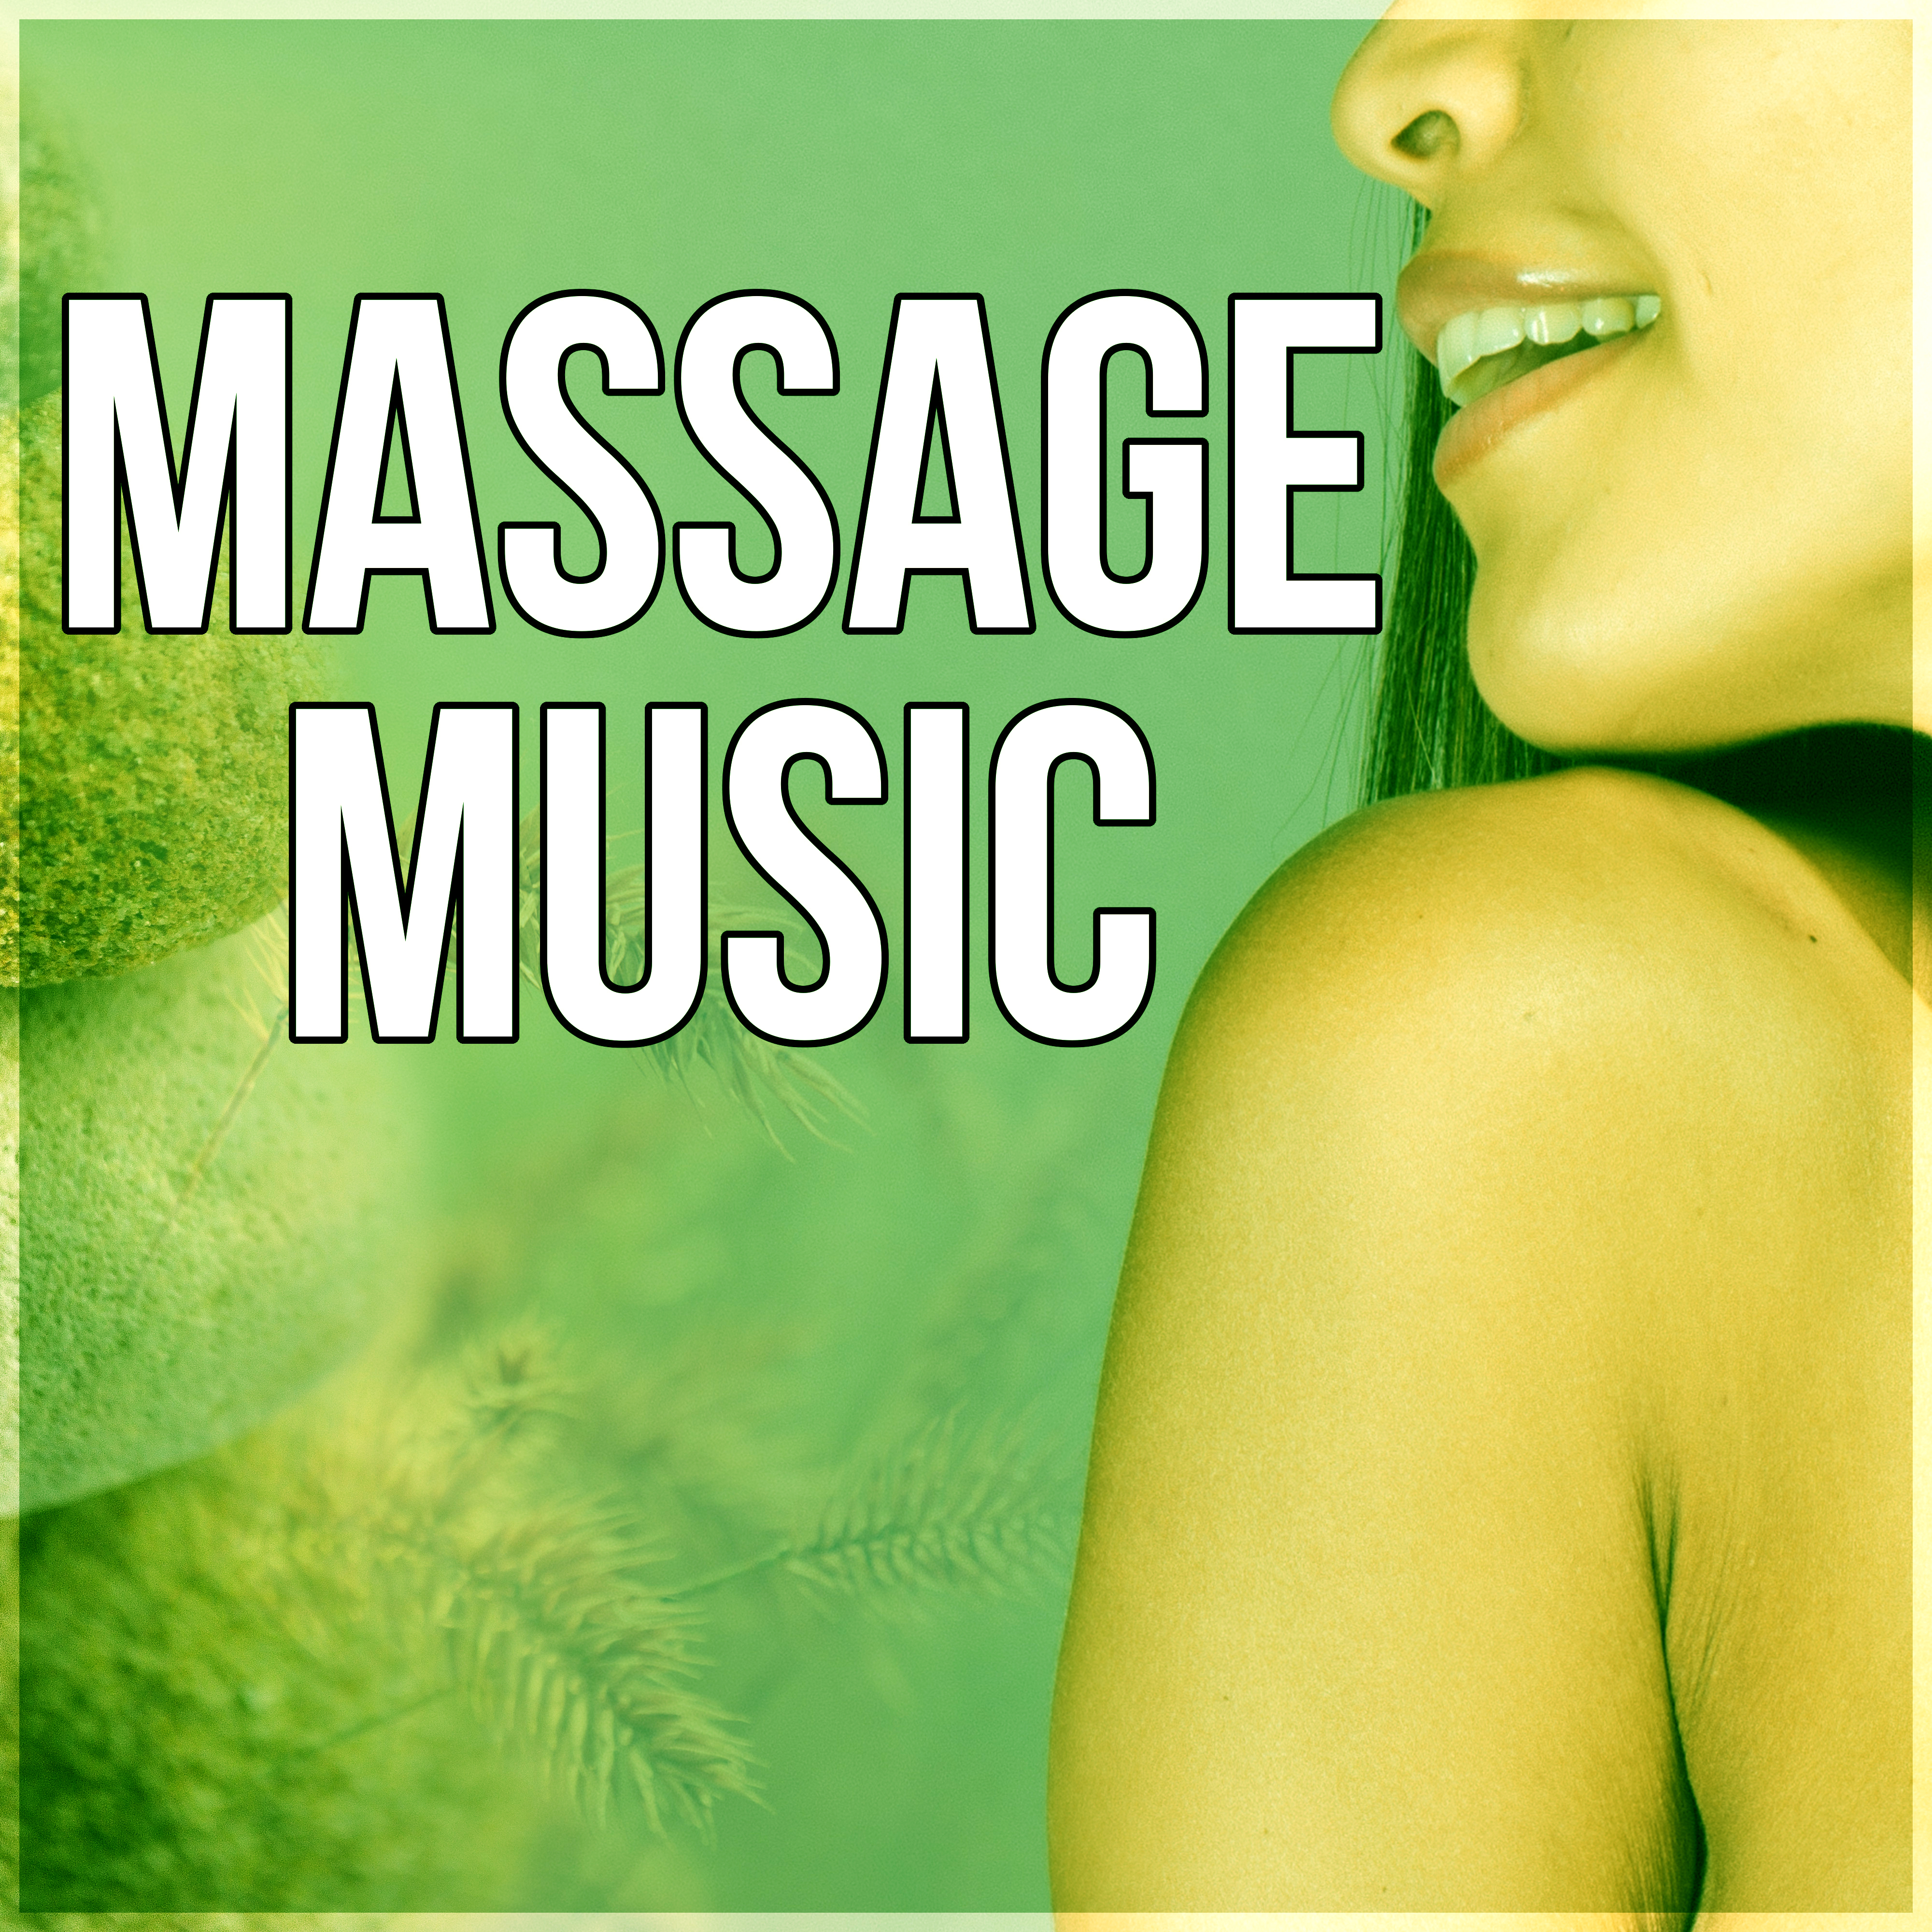 Massage Music  Asian Zen SPA Music for Relaxation, Yoga Meditation  Sound Therapy, Nature Sounds for Stress Relief and Stress Reduction, Tranquility SPA in Wellness Center